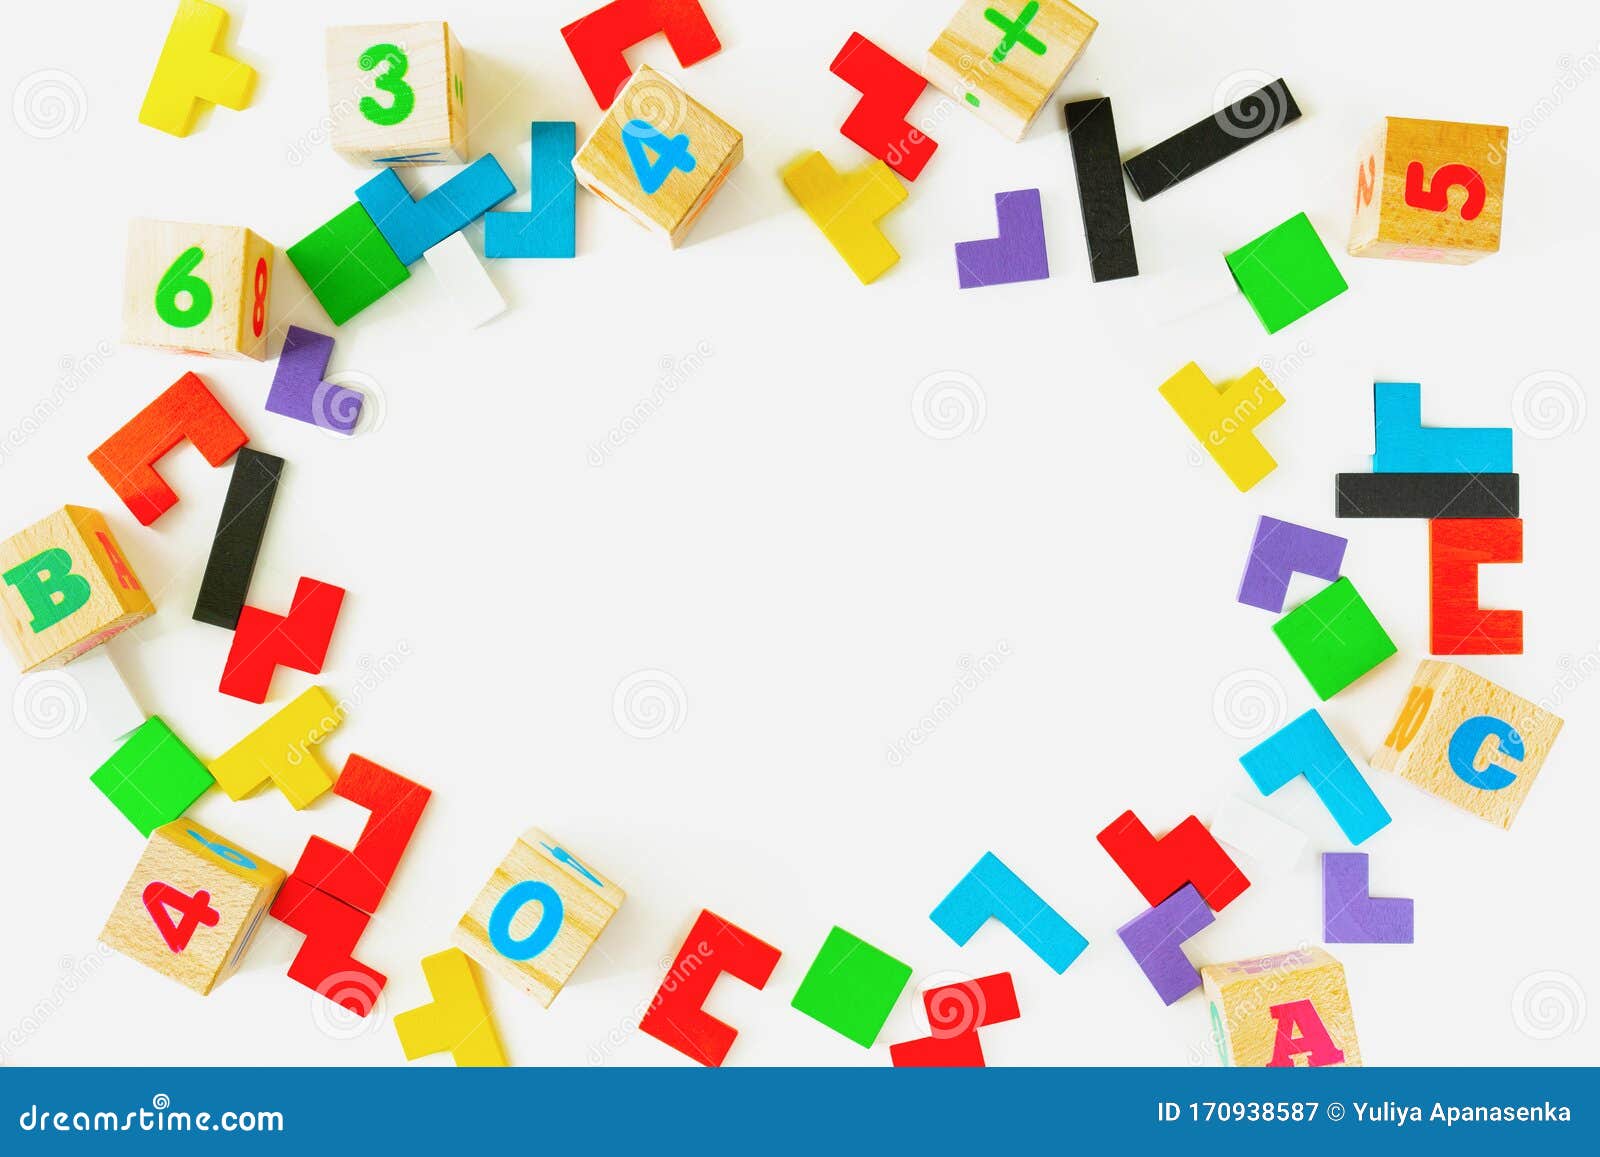 Frame from Developing Wooden Blocks, Cars and Puzzles. Stock Image ...